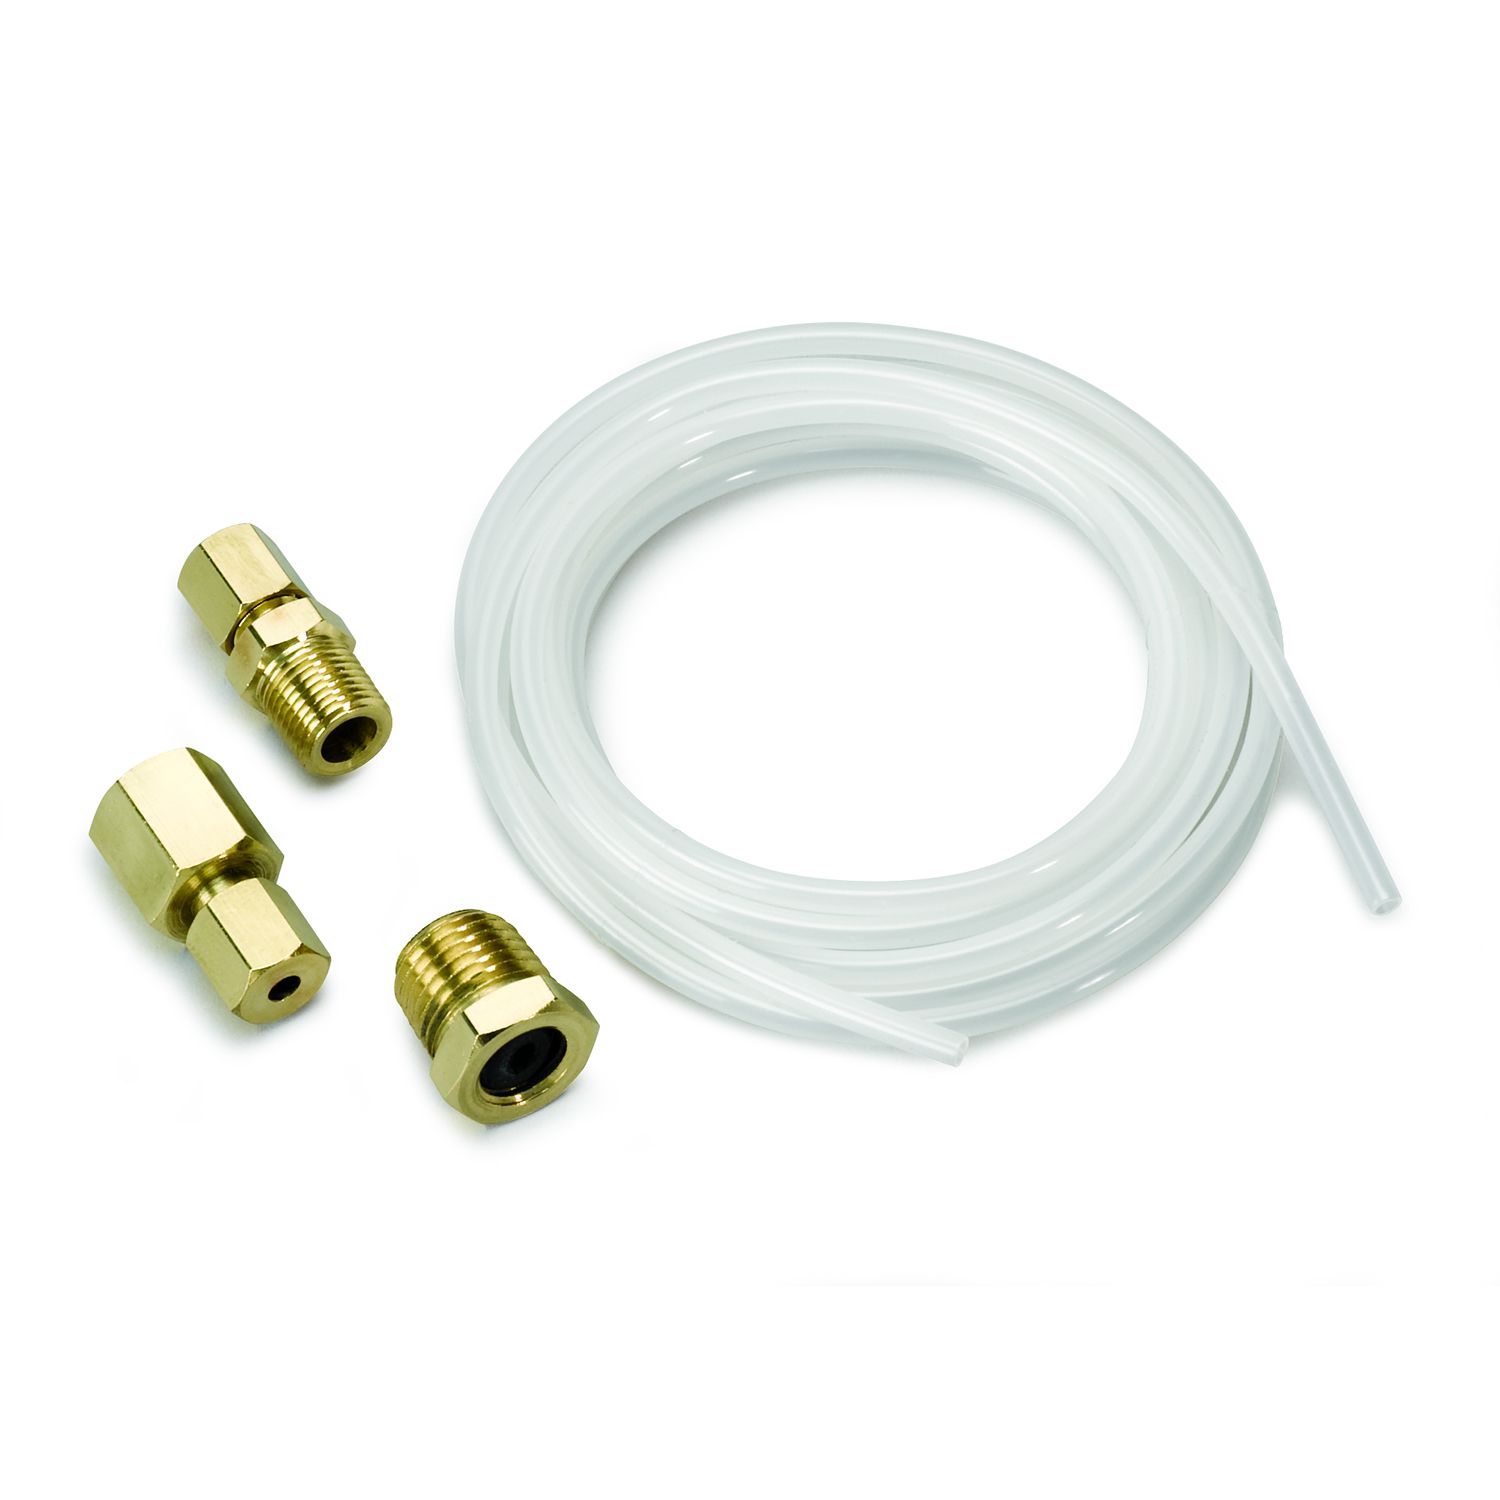 How to Install Compression Fittings on Nylon and Copper Tubing